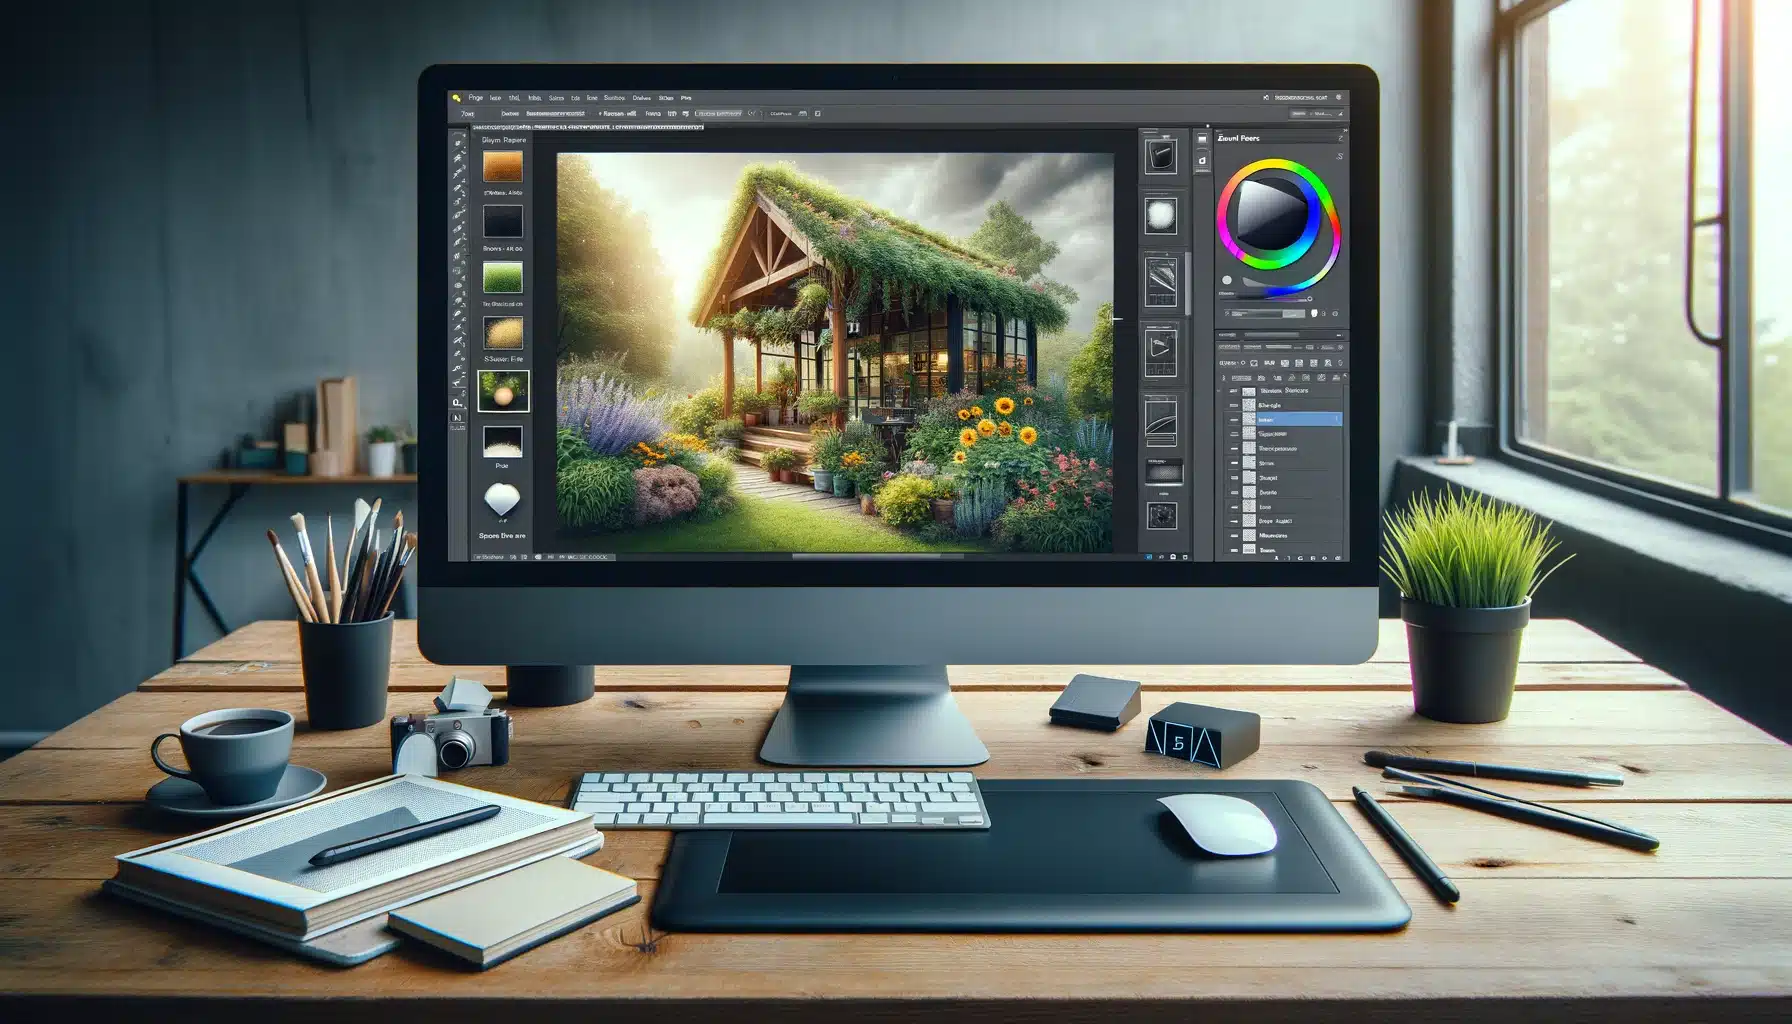 Digital artist's workspace with Photoshop Smart Filters on display, showing before and after editing effects, alongside a graphics tablet and editing tools.